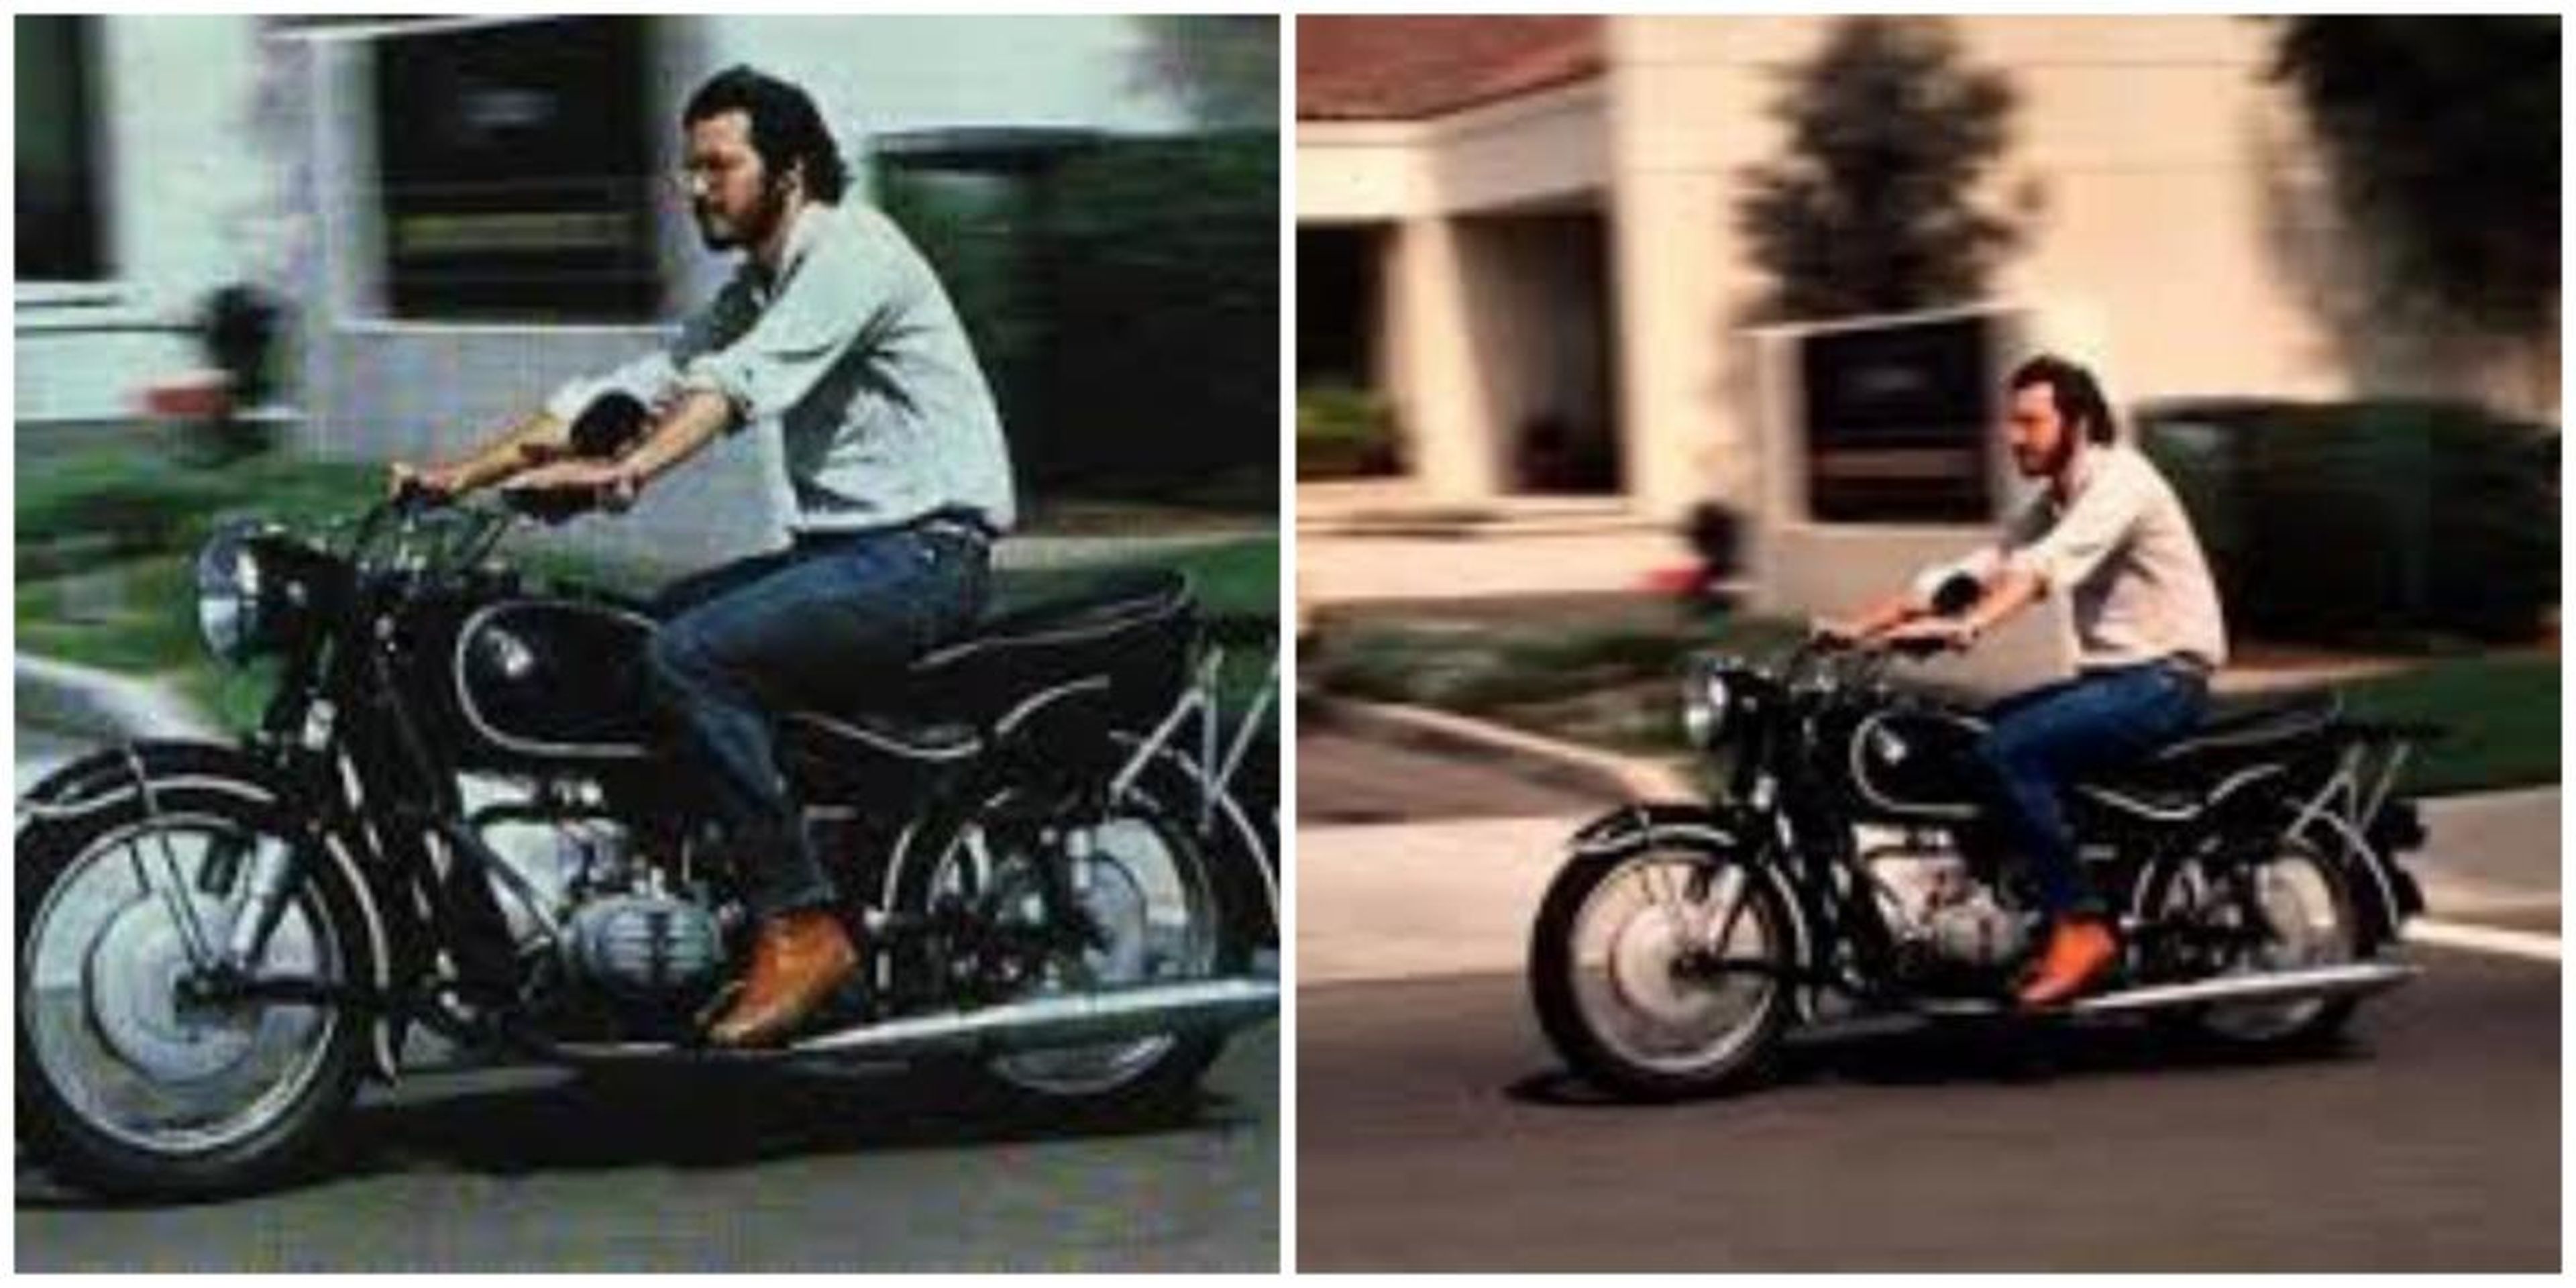 There was a motorbike parked in the Atrium of 10460 Bandley Drive. Shelton says: "It was a 500cc BMW motorcycle similar or identical to the one that Steve had ridden in Africa (or so the story goes.) A man called Apple one day in early 1984 after the Mac